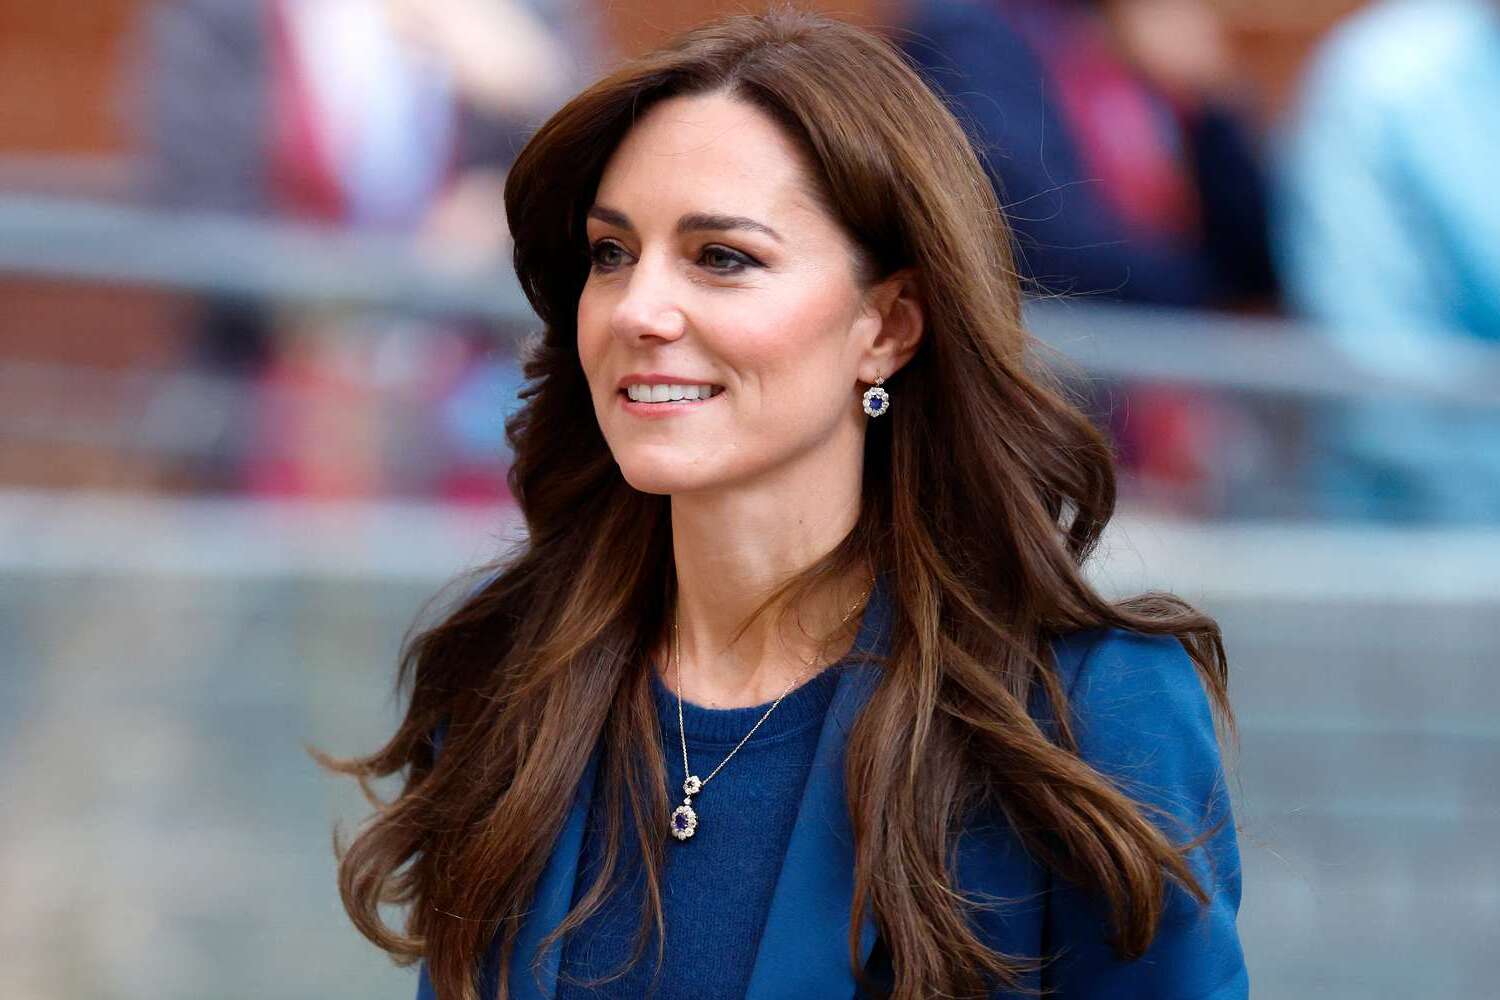 Kate Middleton’s Public Appearance Sparks New Round Of Speculation And Memes